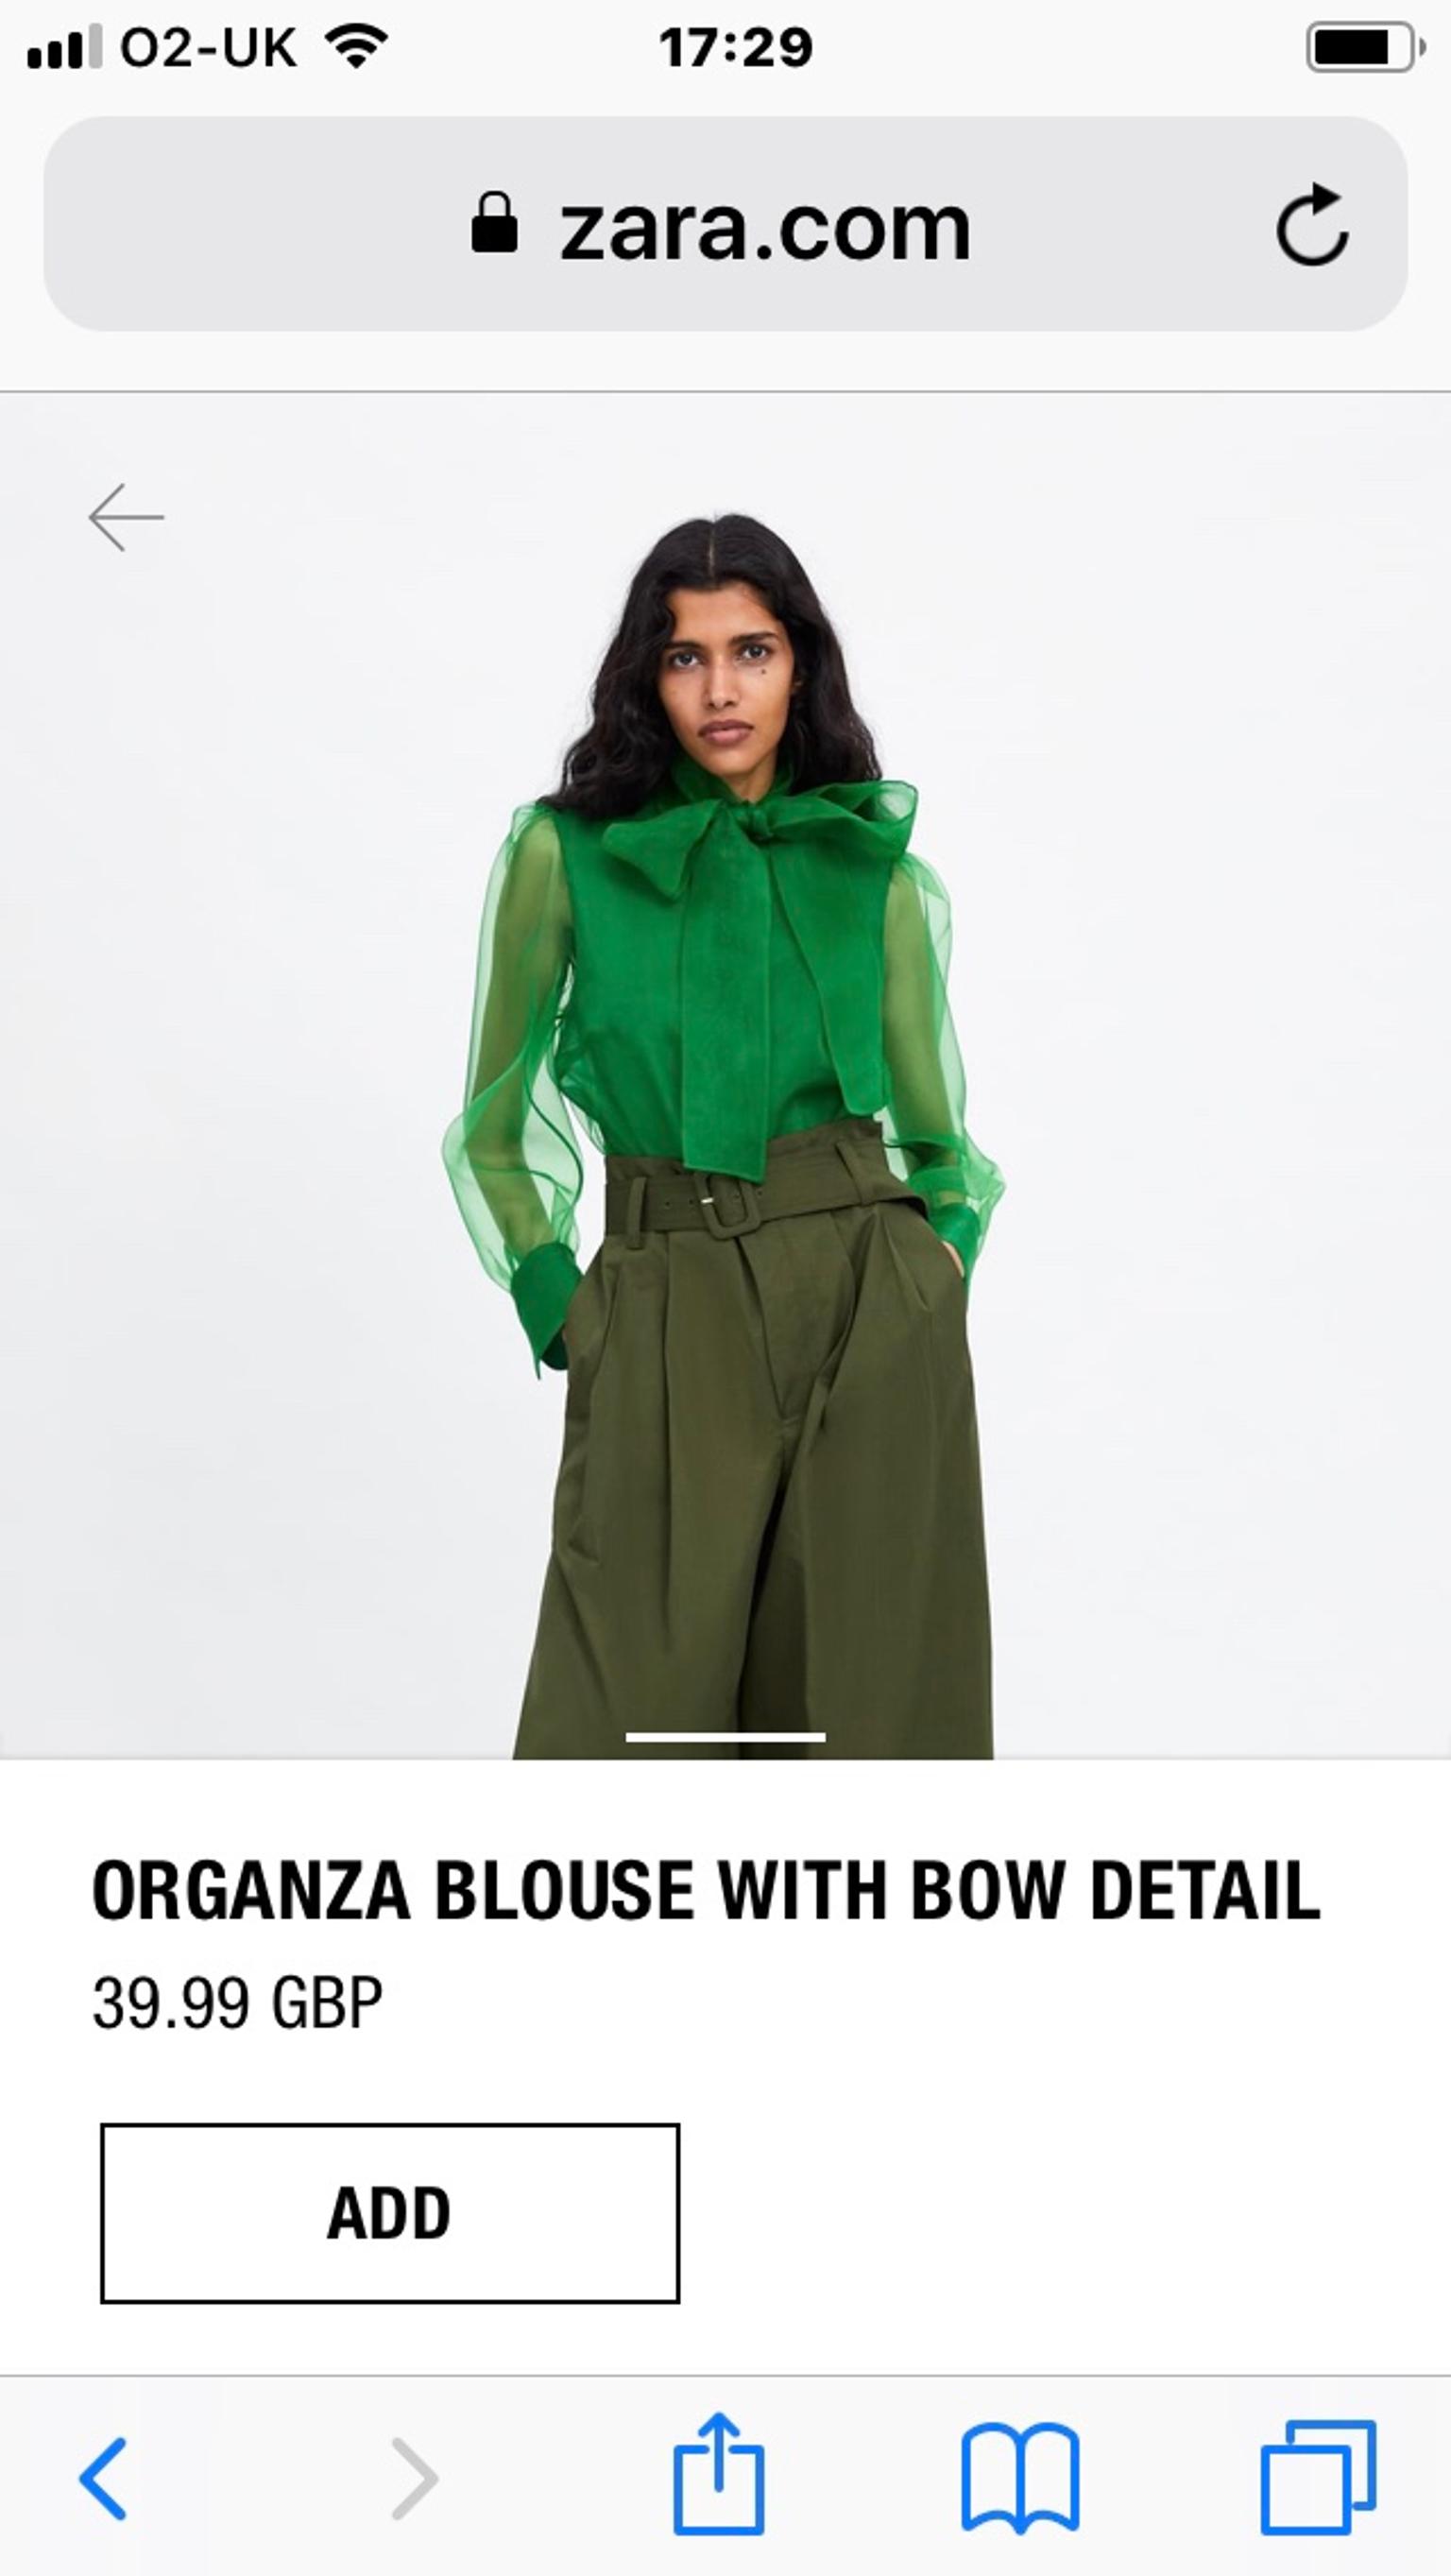 zara organza blouse with bow detail